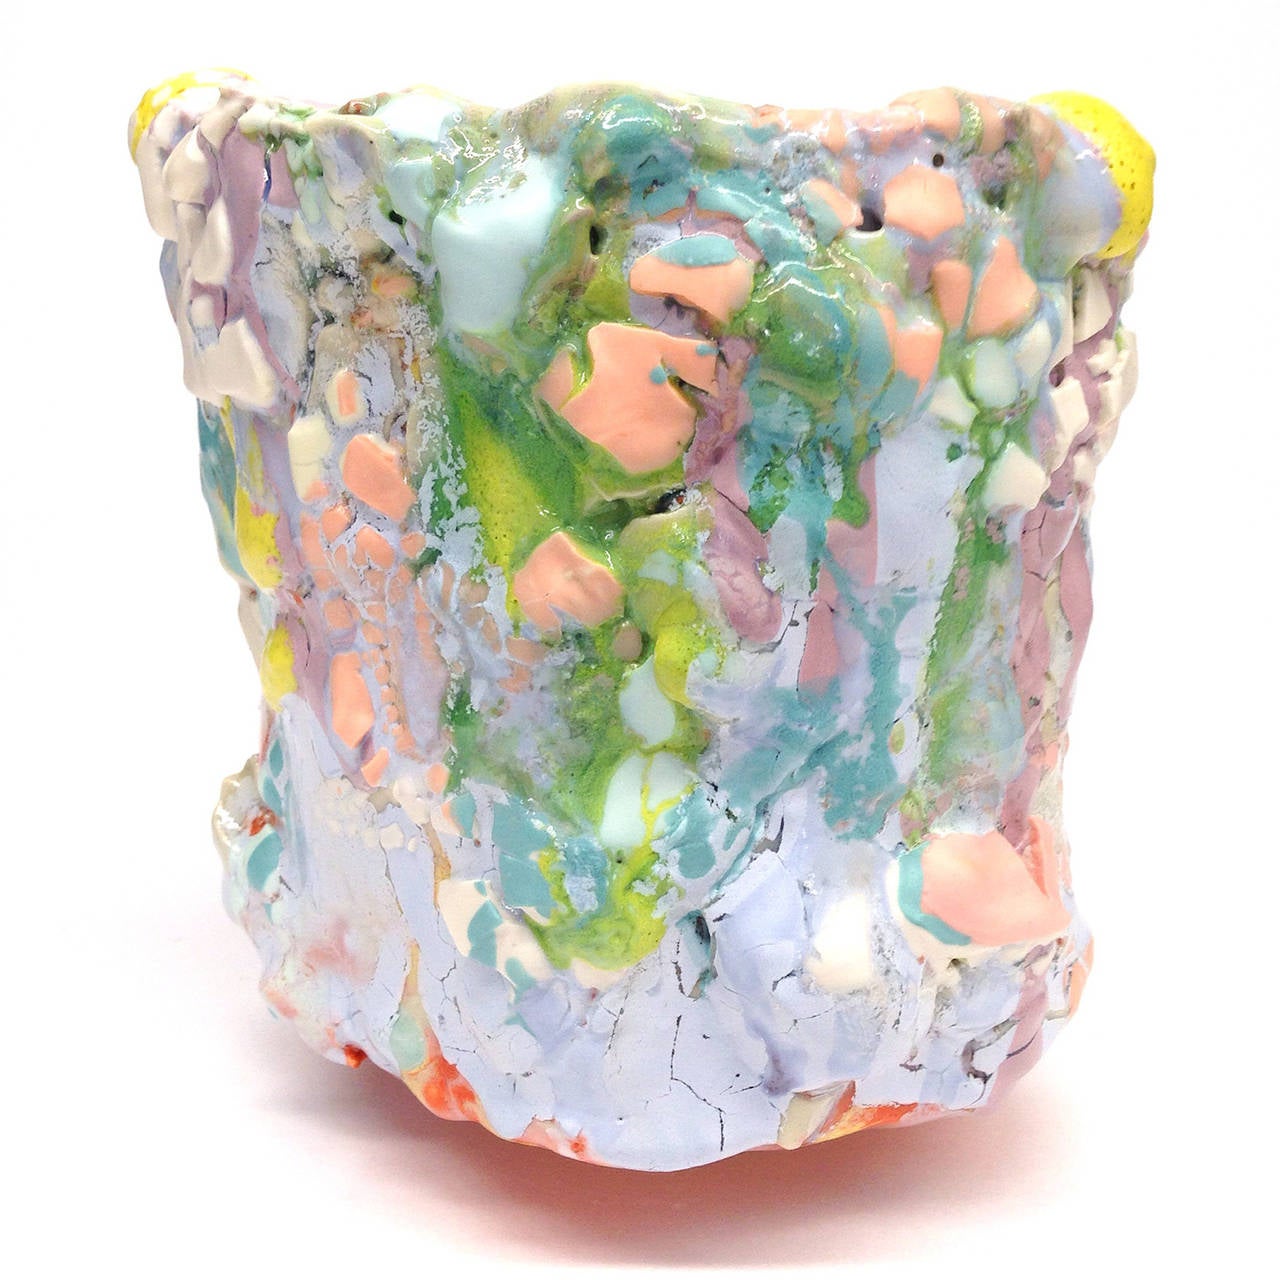 Contemporary ceramic vessel by LA based mixed-media sculptor Brian Rochefort for Kelly Behun Studio. Highly textured and worked surface resulting from multiple firings. Multi colored glazes. Watertight, may be used as a vase.